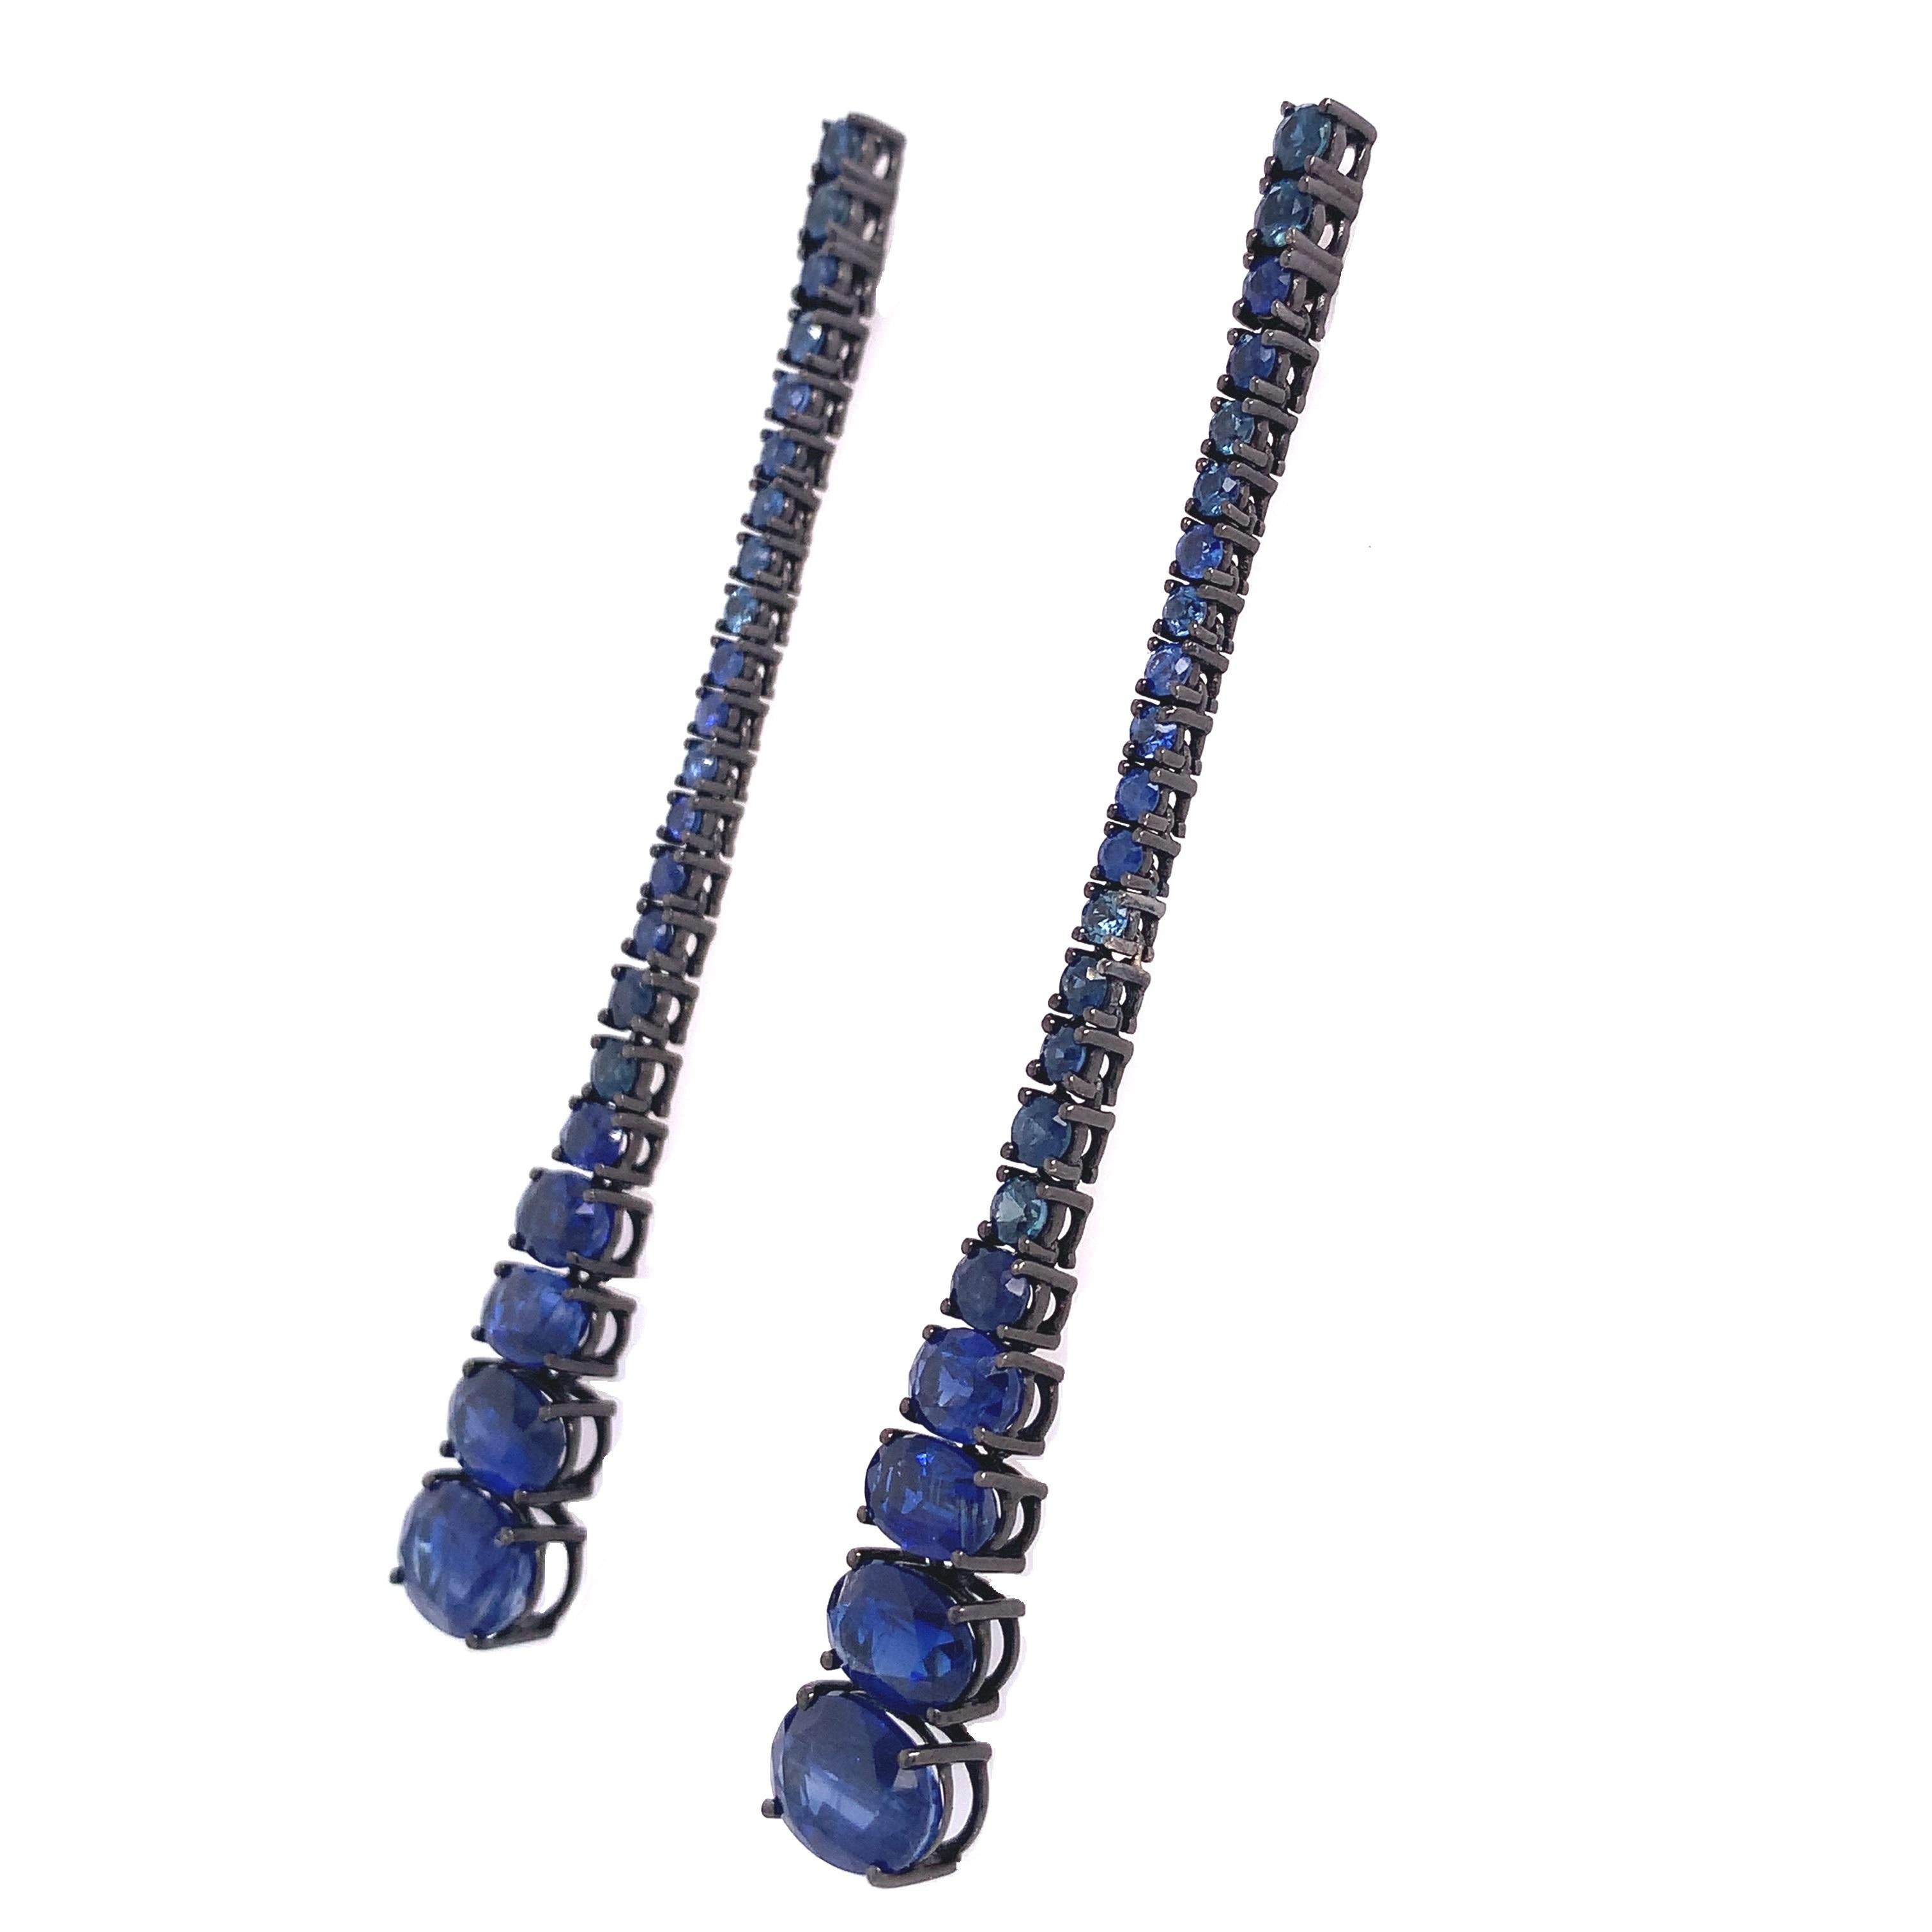 Exclusive Collection,

Blue Sapphires totaling 2.1 carats combined with Kyanite totaling 8.34 carats captivate with their radiance and chromatic intensity in these magnificent linear earrings